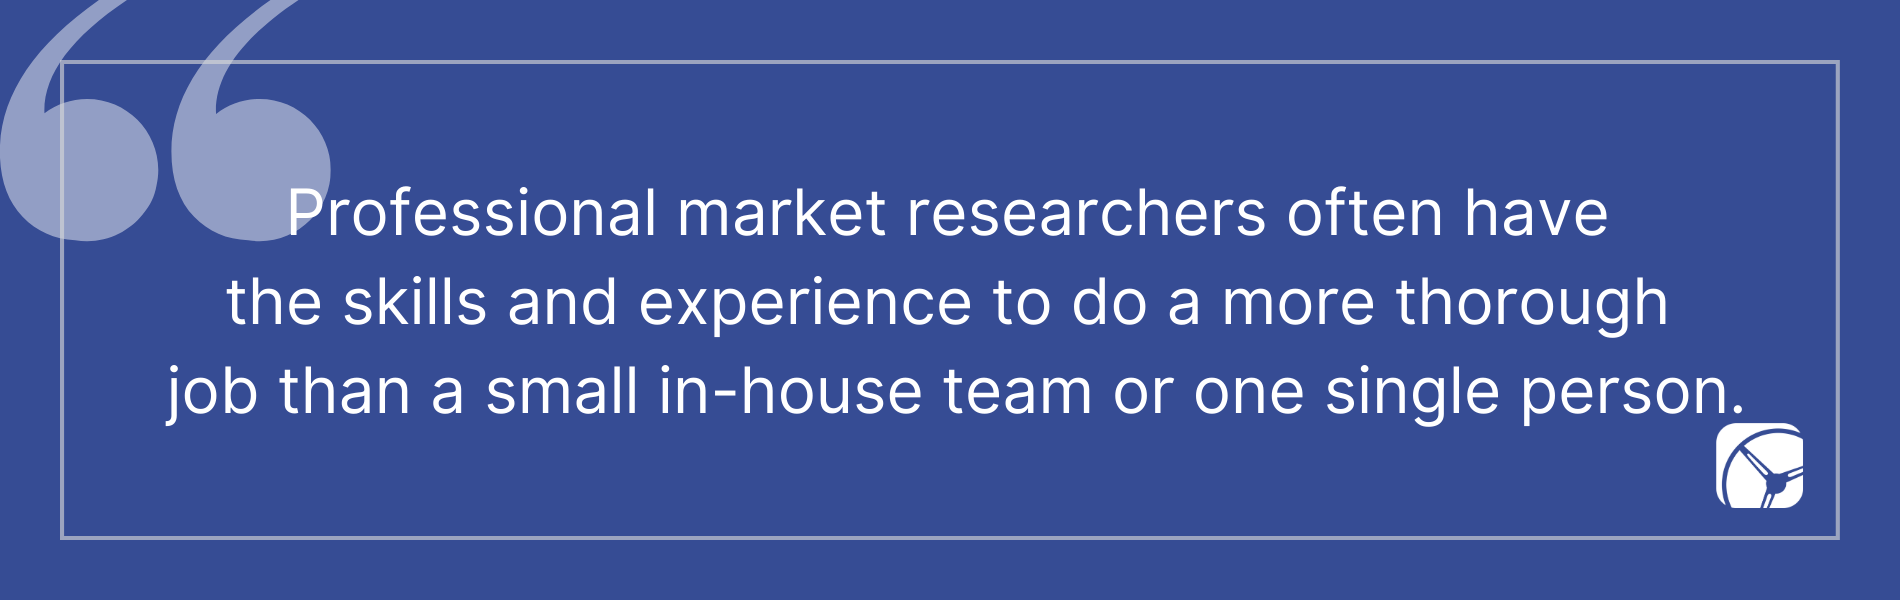 Professional market researchers often have the skills and experience to do a more thorough job than a small in-house team or one single person.